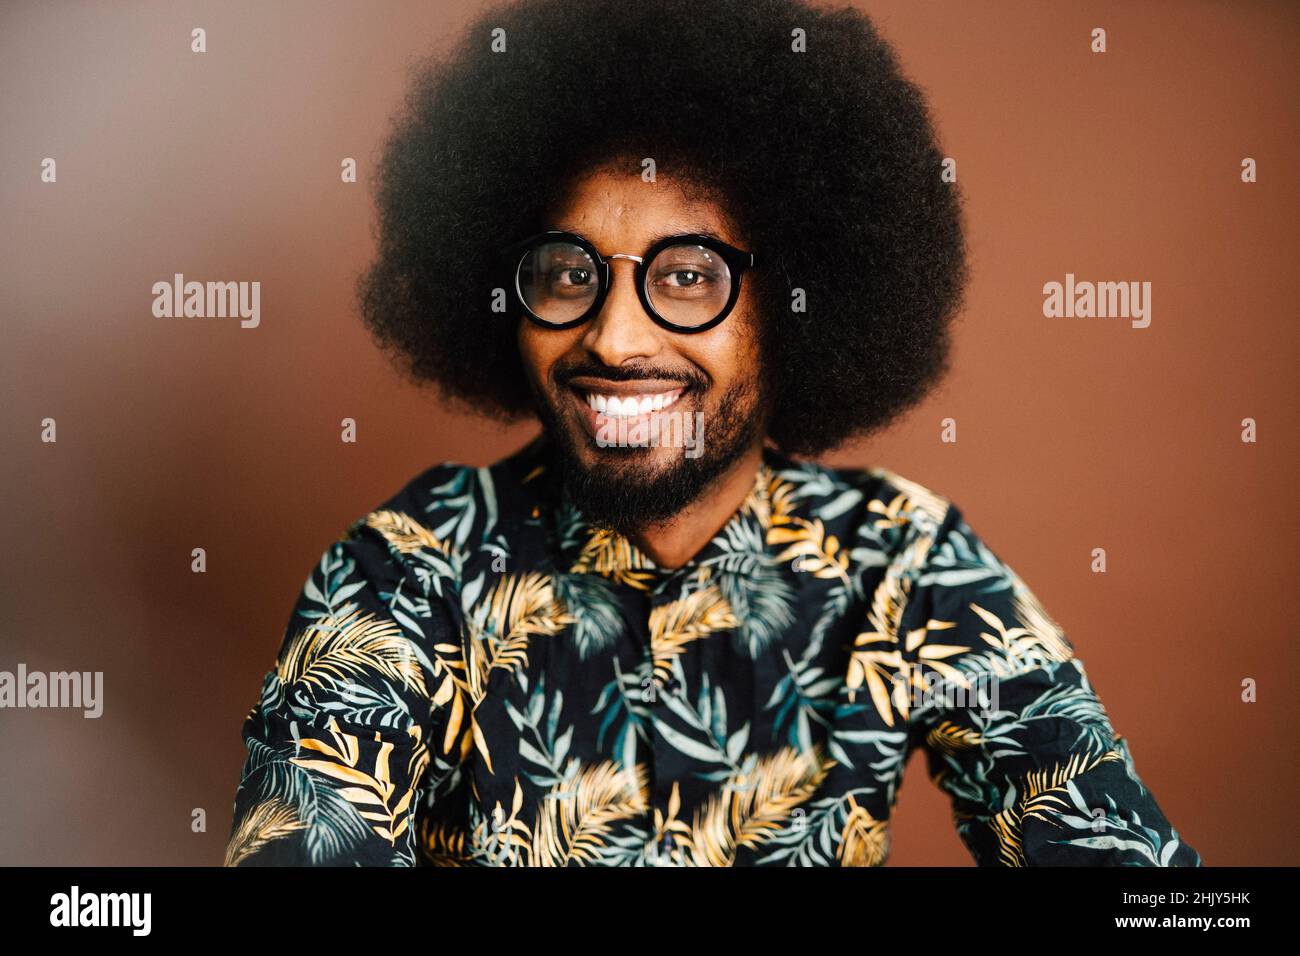 Portrait of smiling man with Afro hairstyle in studio Stock Photo